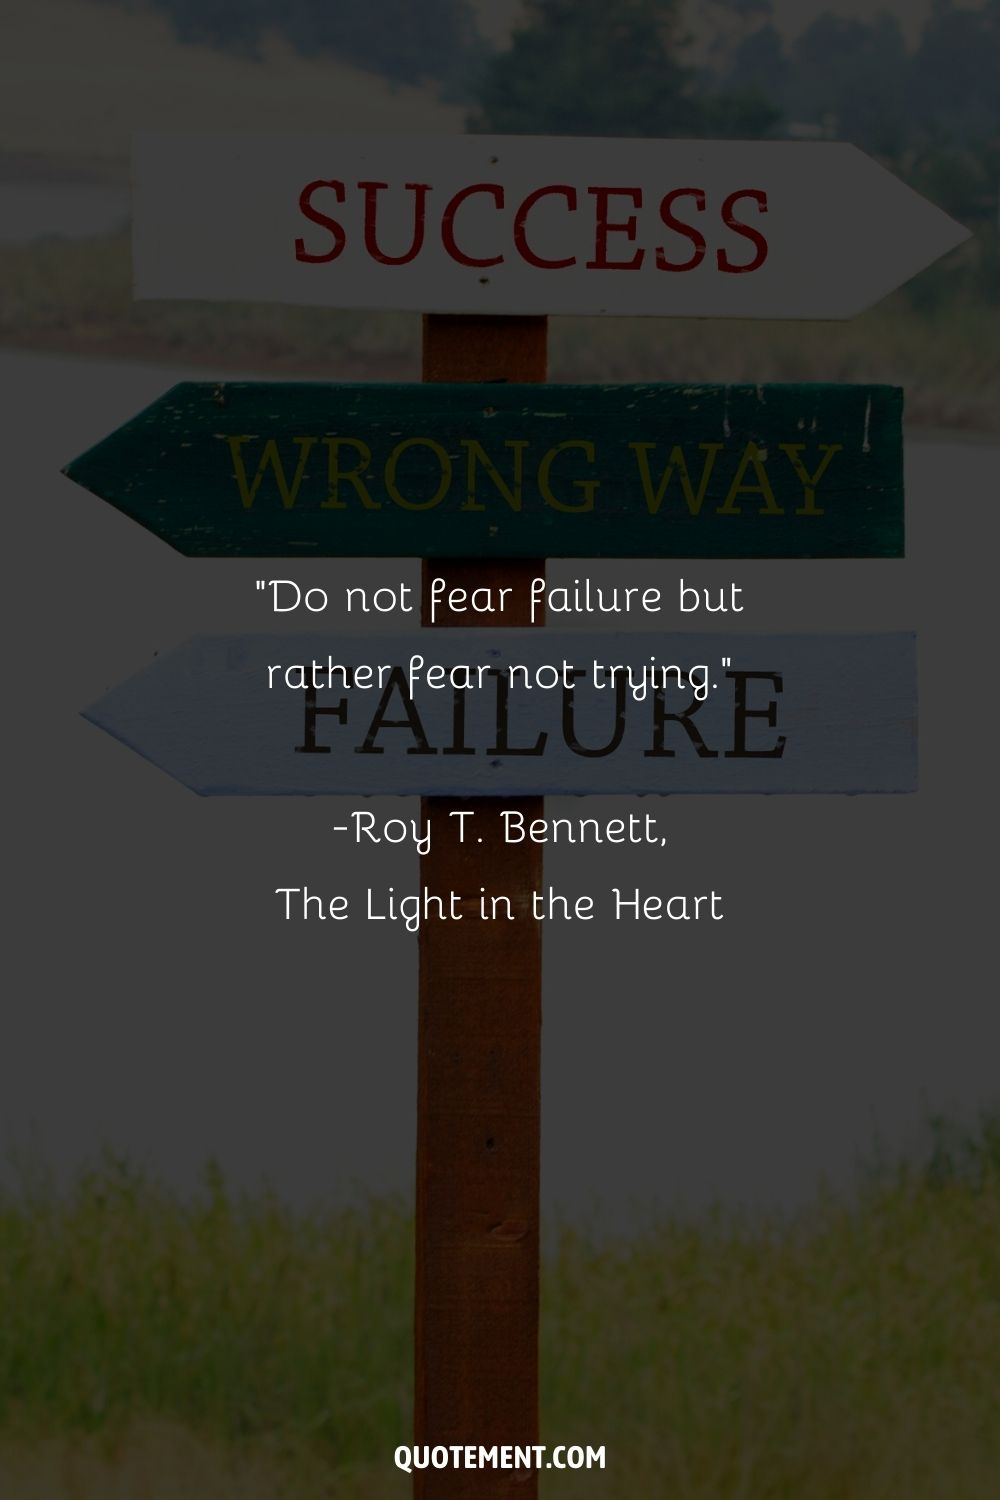 “Do not fear failure but rather fear not trying.” ― Roy T. Bennett, The Light in the Heart